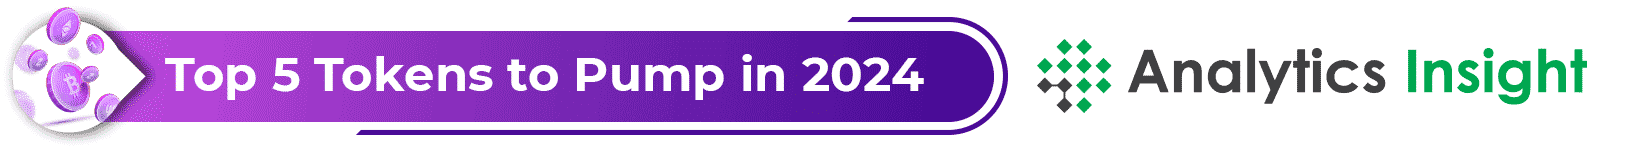 Top 5 Tokens to Pump in 2024